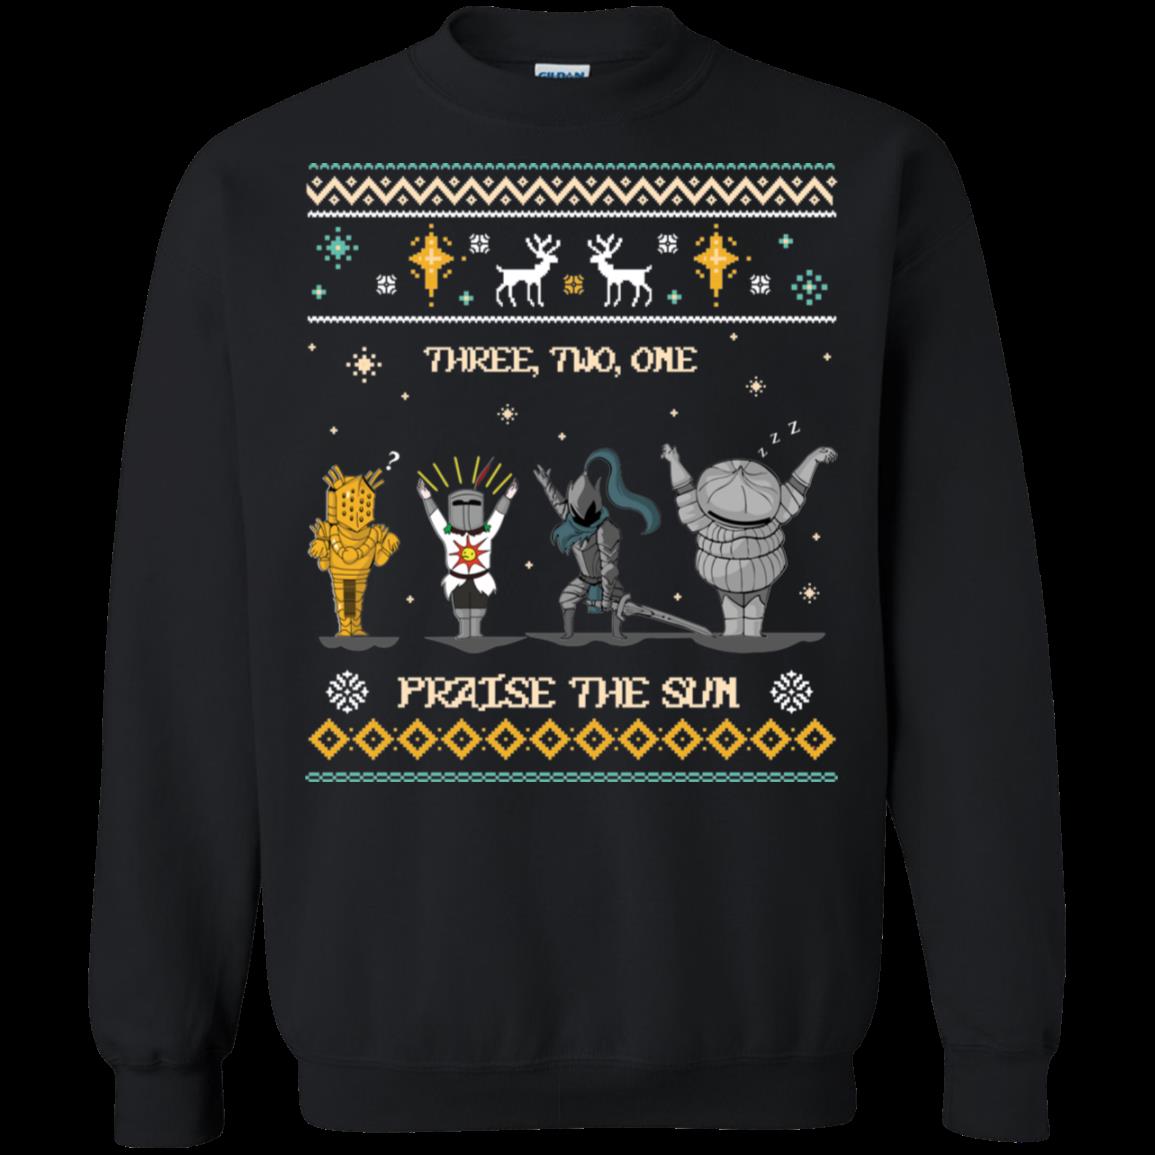 Hoodies Sweatshirts Praise The Sun There Two One Dark Souls Solaire Of Astora Christmas Ugly Sweater